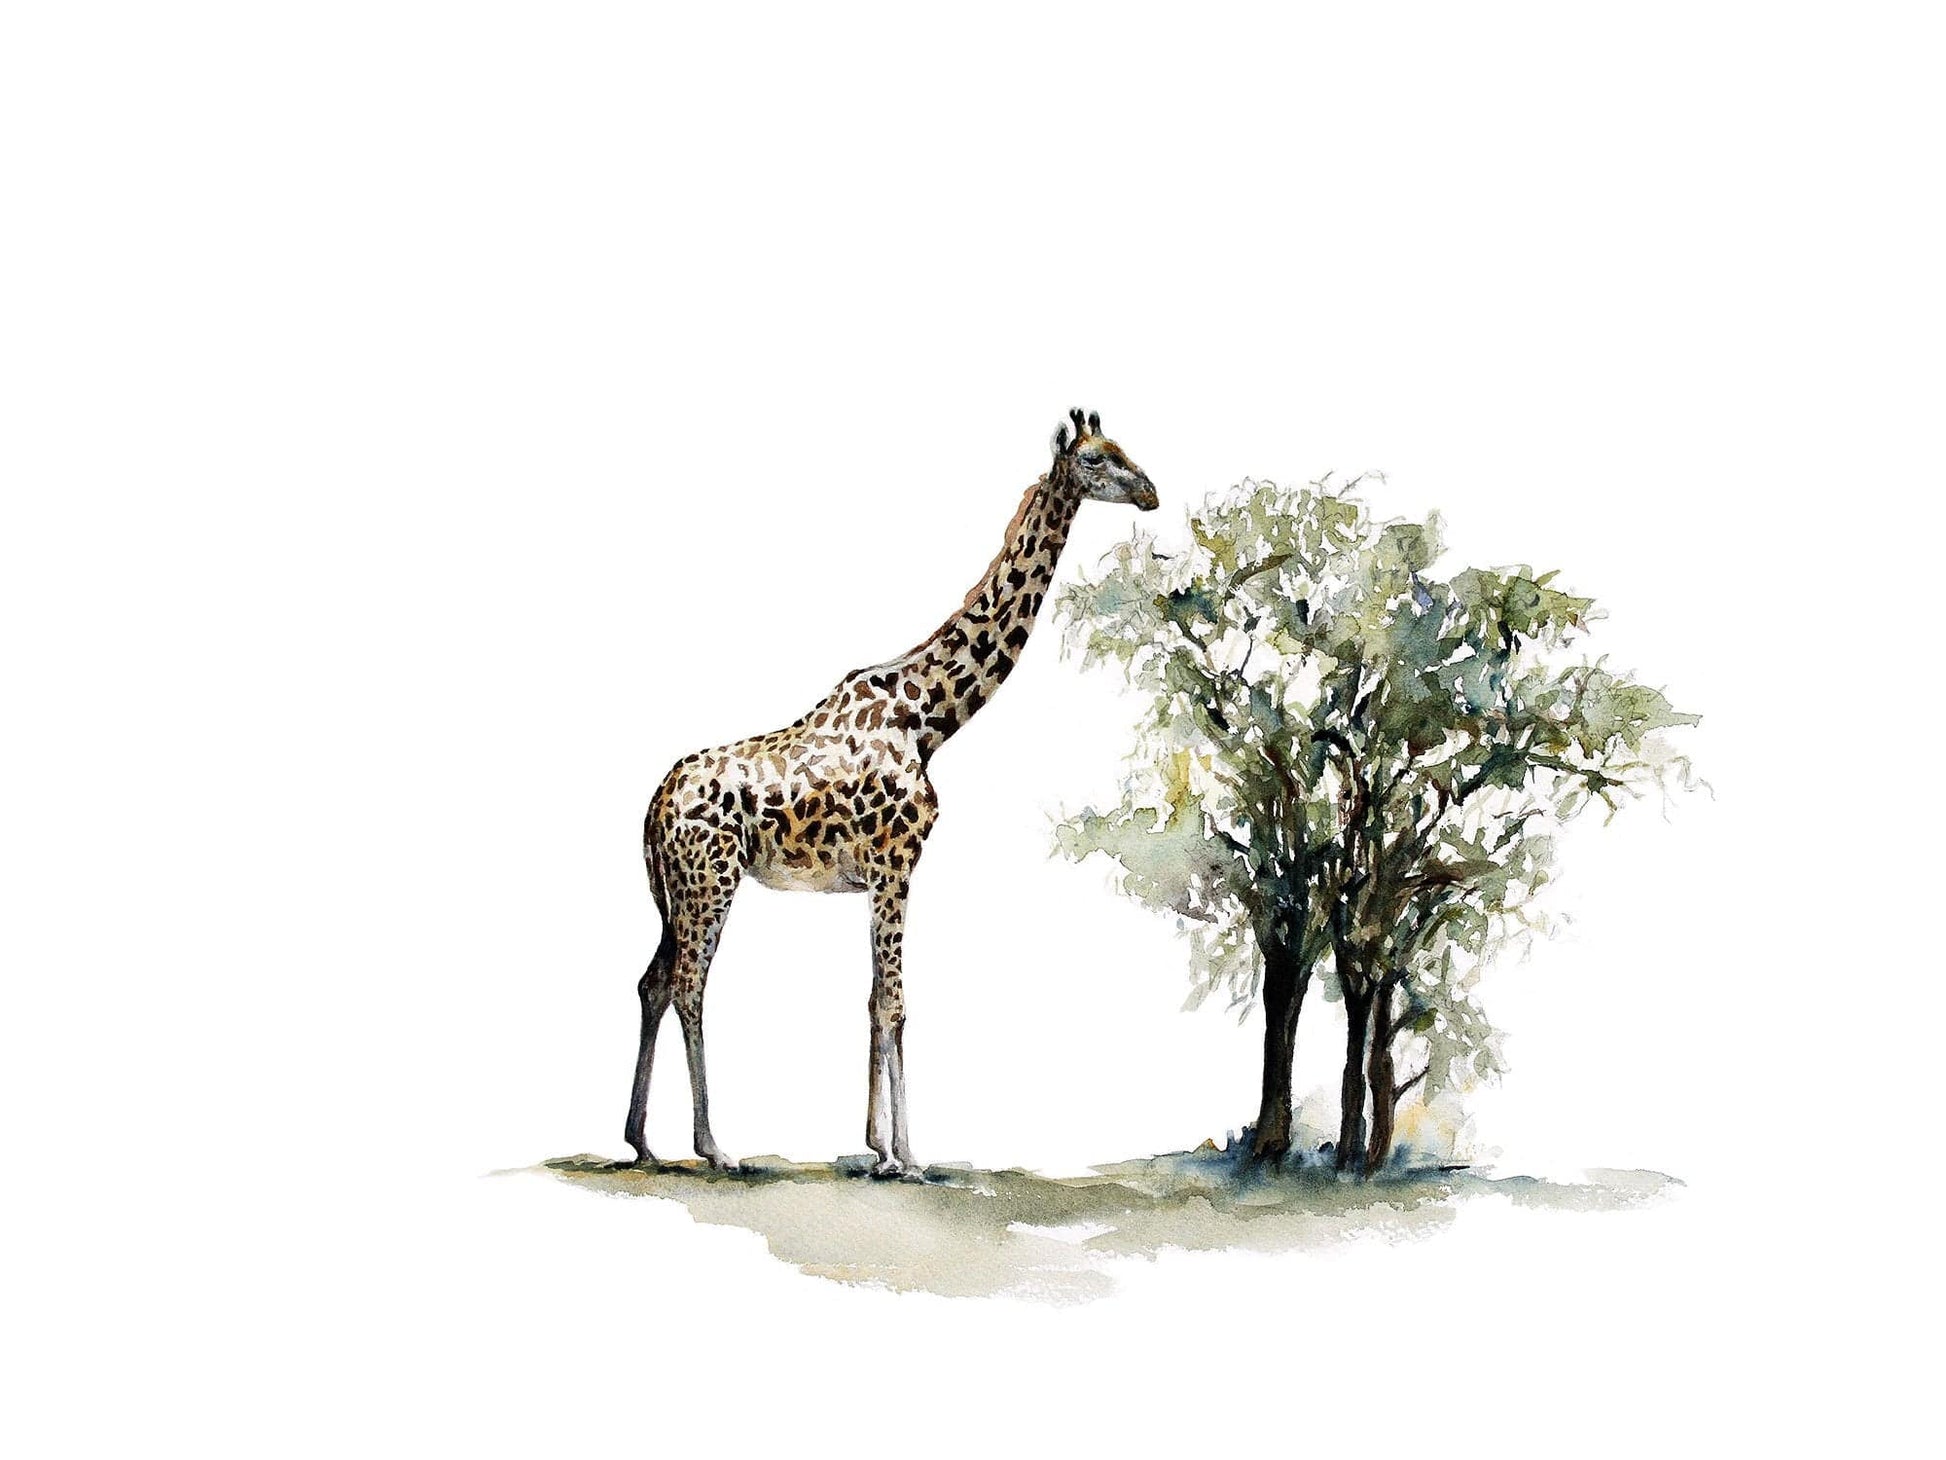 A watercolor painting of a giraffe artwork available as a print